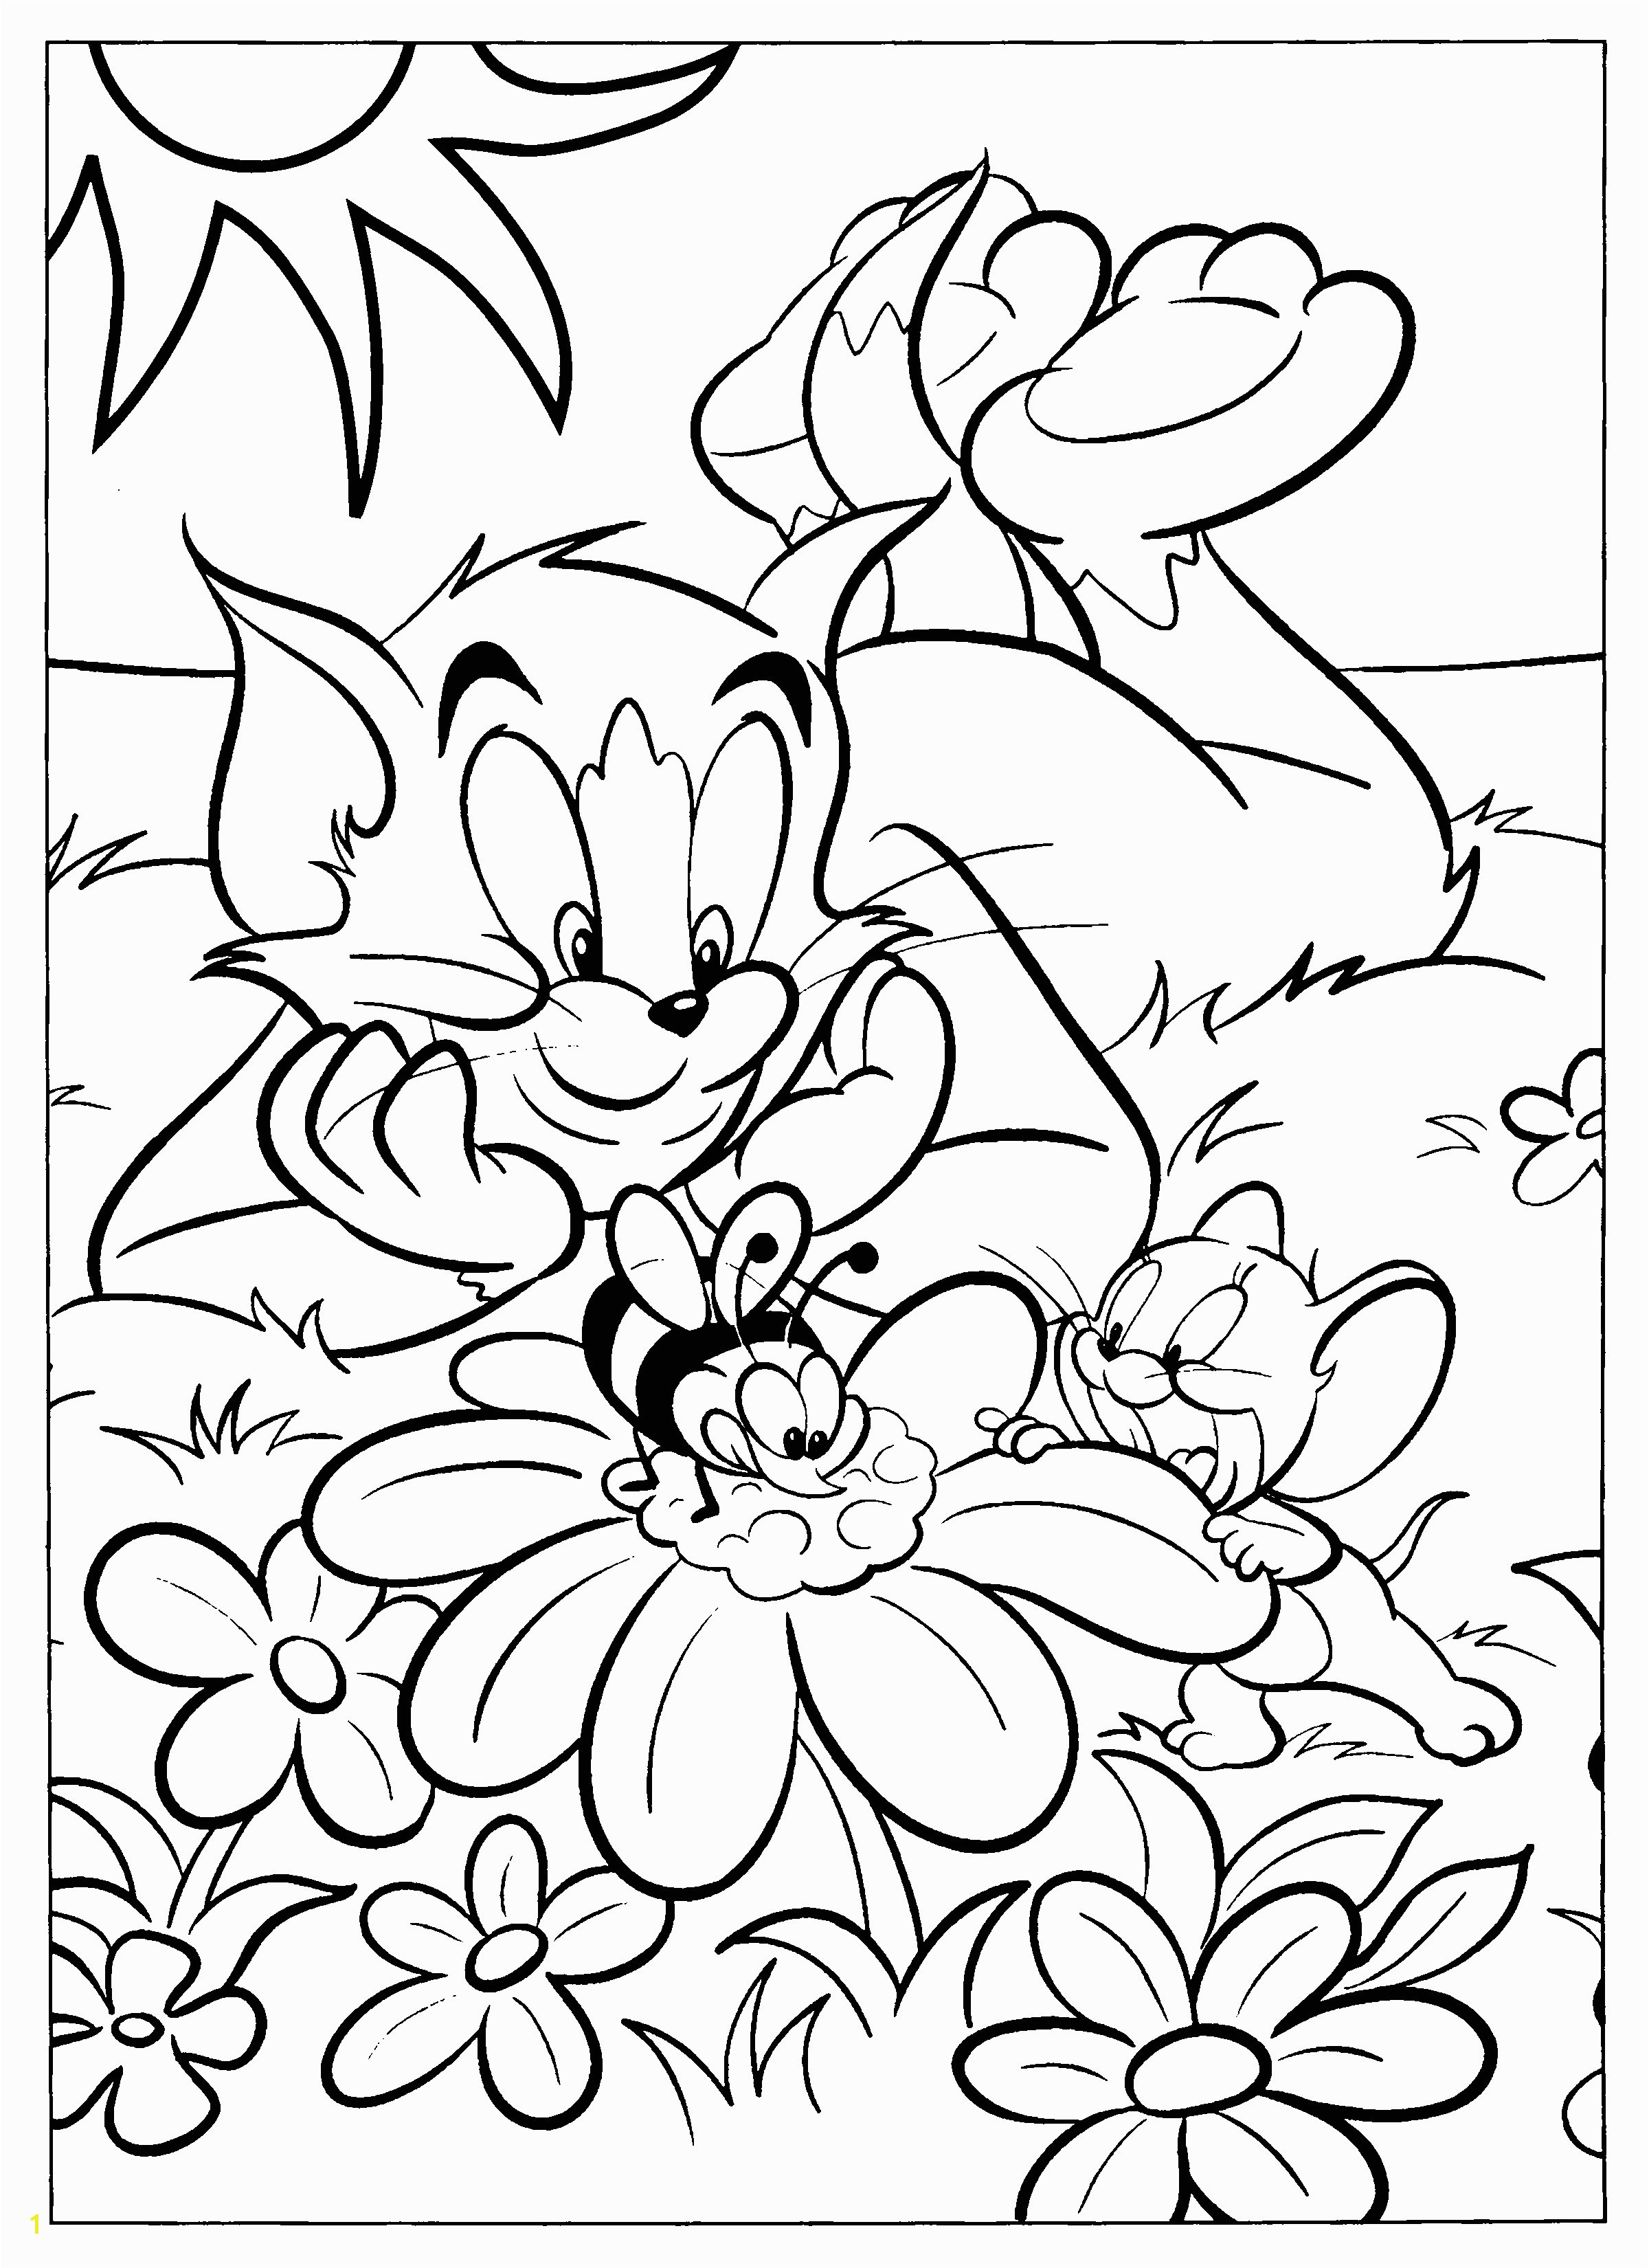 Jerry From tom and Jerry Coloring Pages tom and Jerry Coloring Pages Cool Coloring Pages